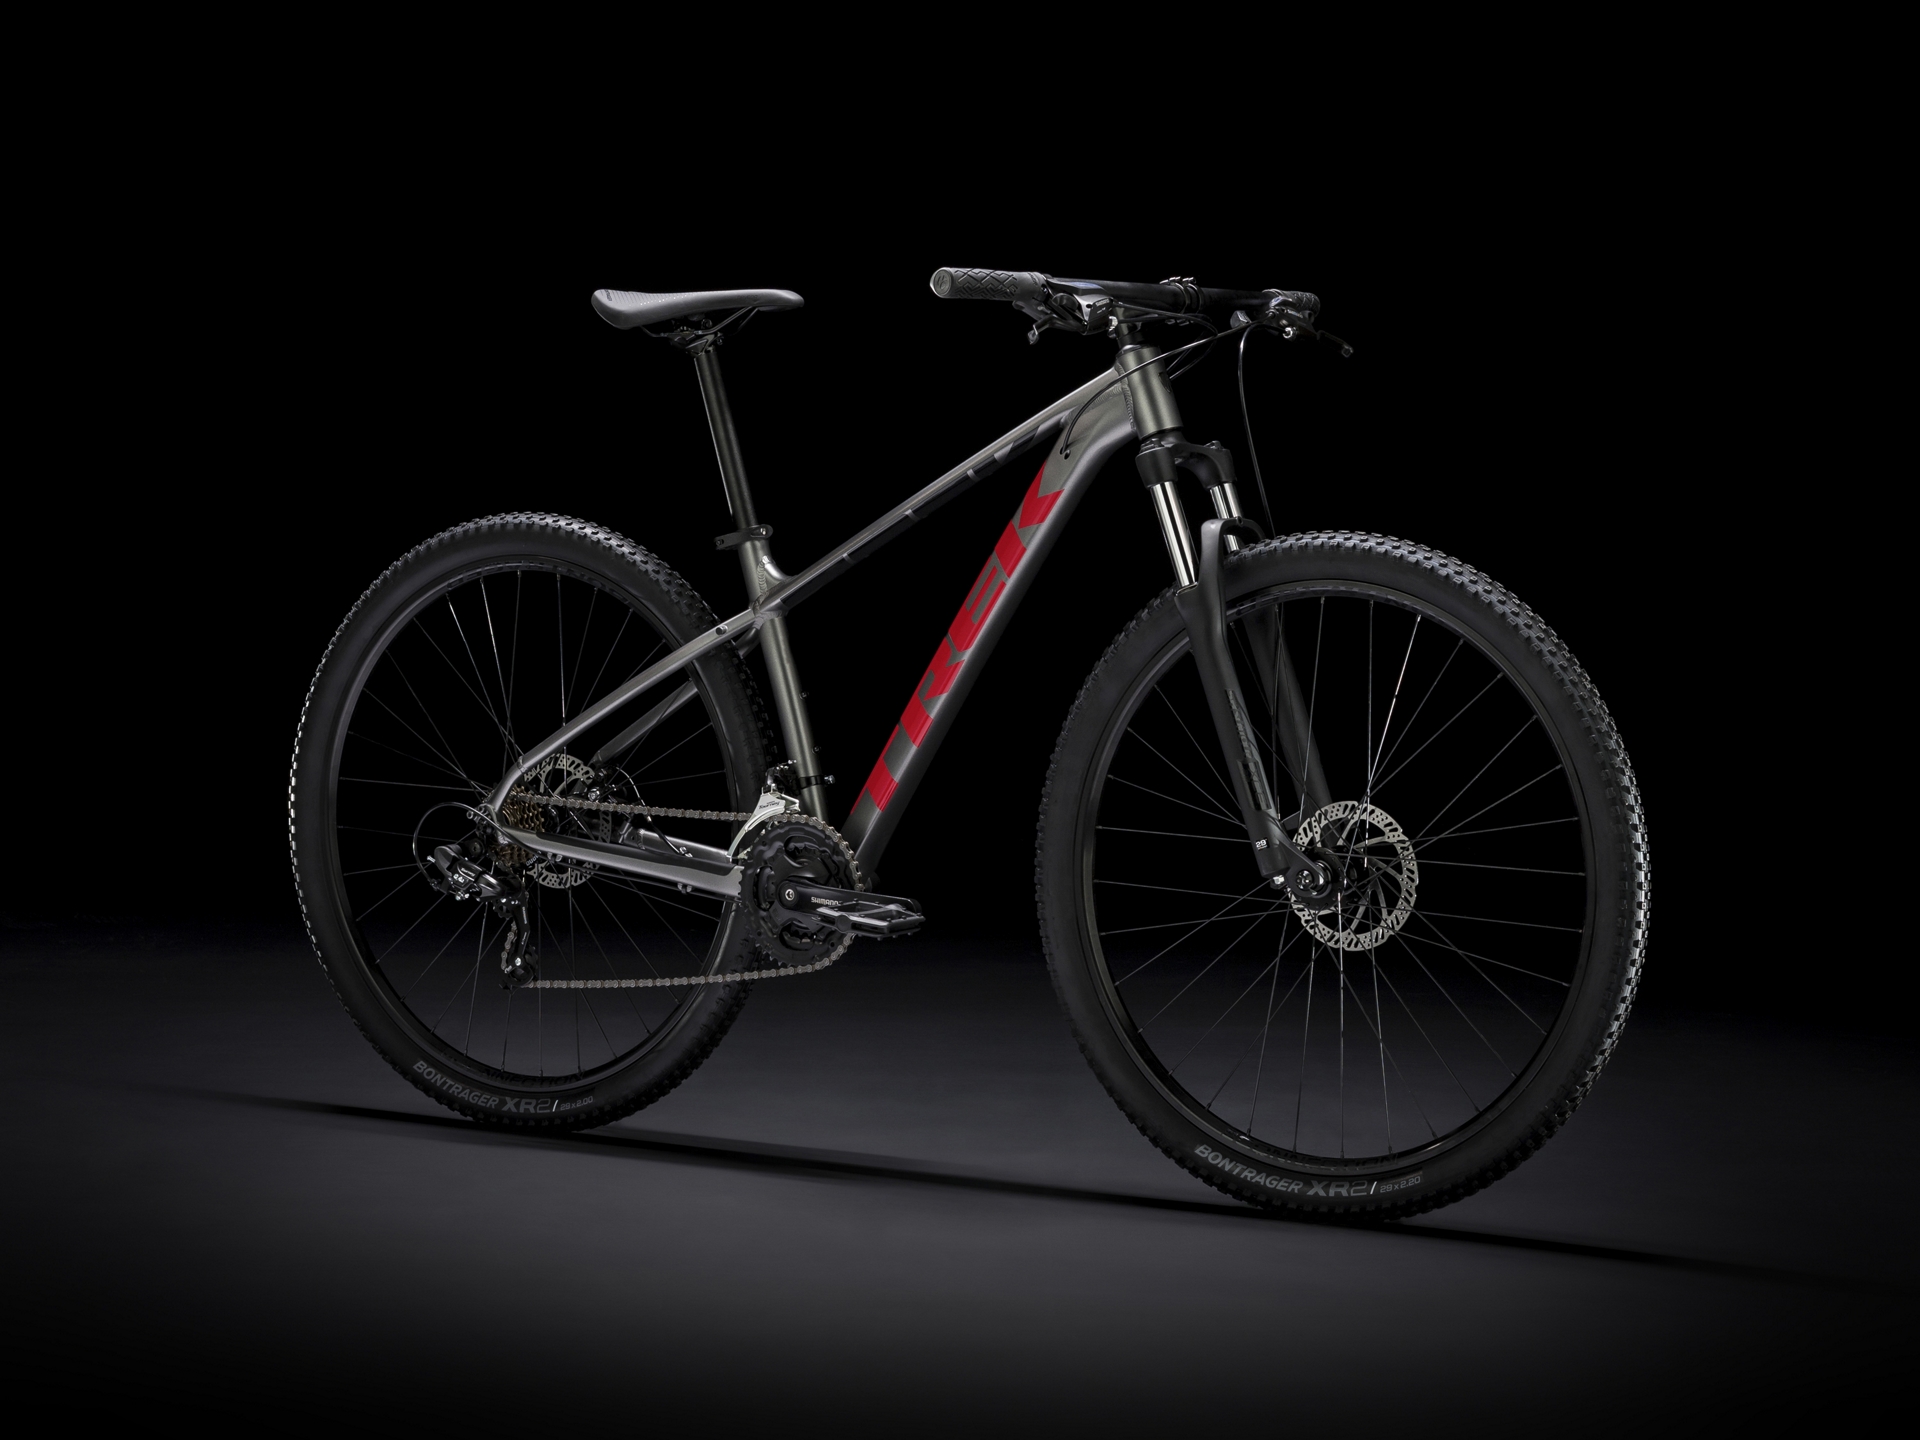 Oude man Schrijfmachine Tot ziens What To Think About The Trek Marlin 4? [2023 Model]